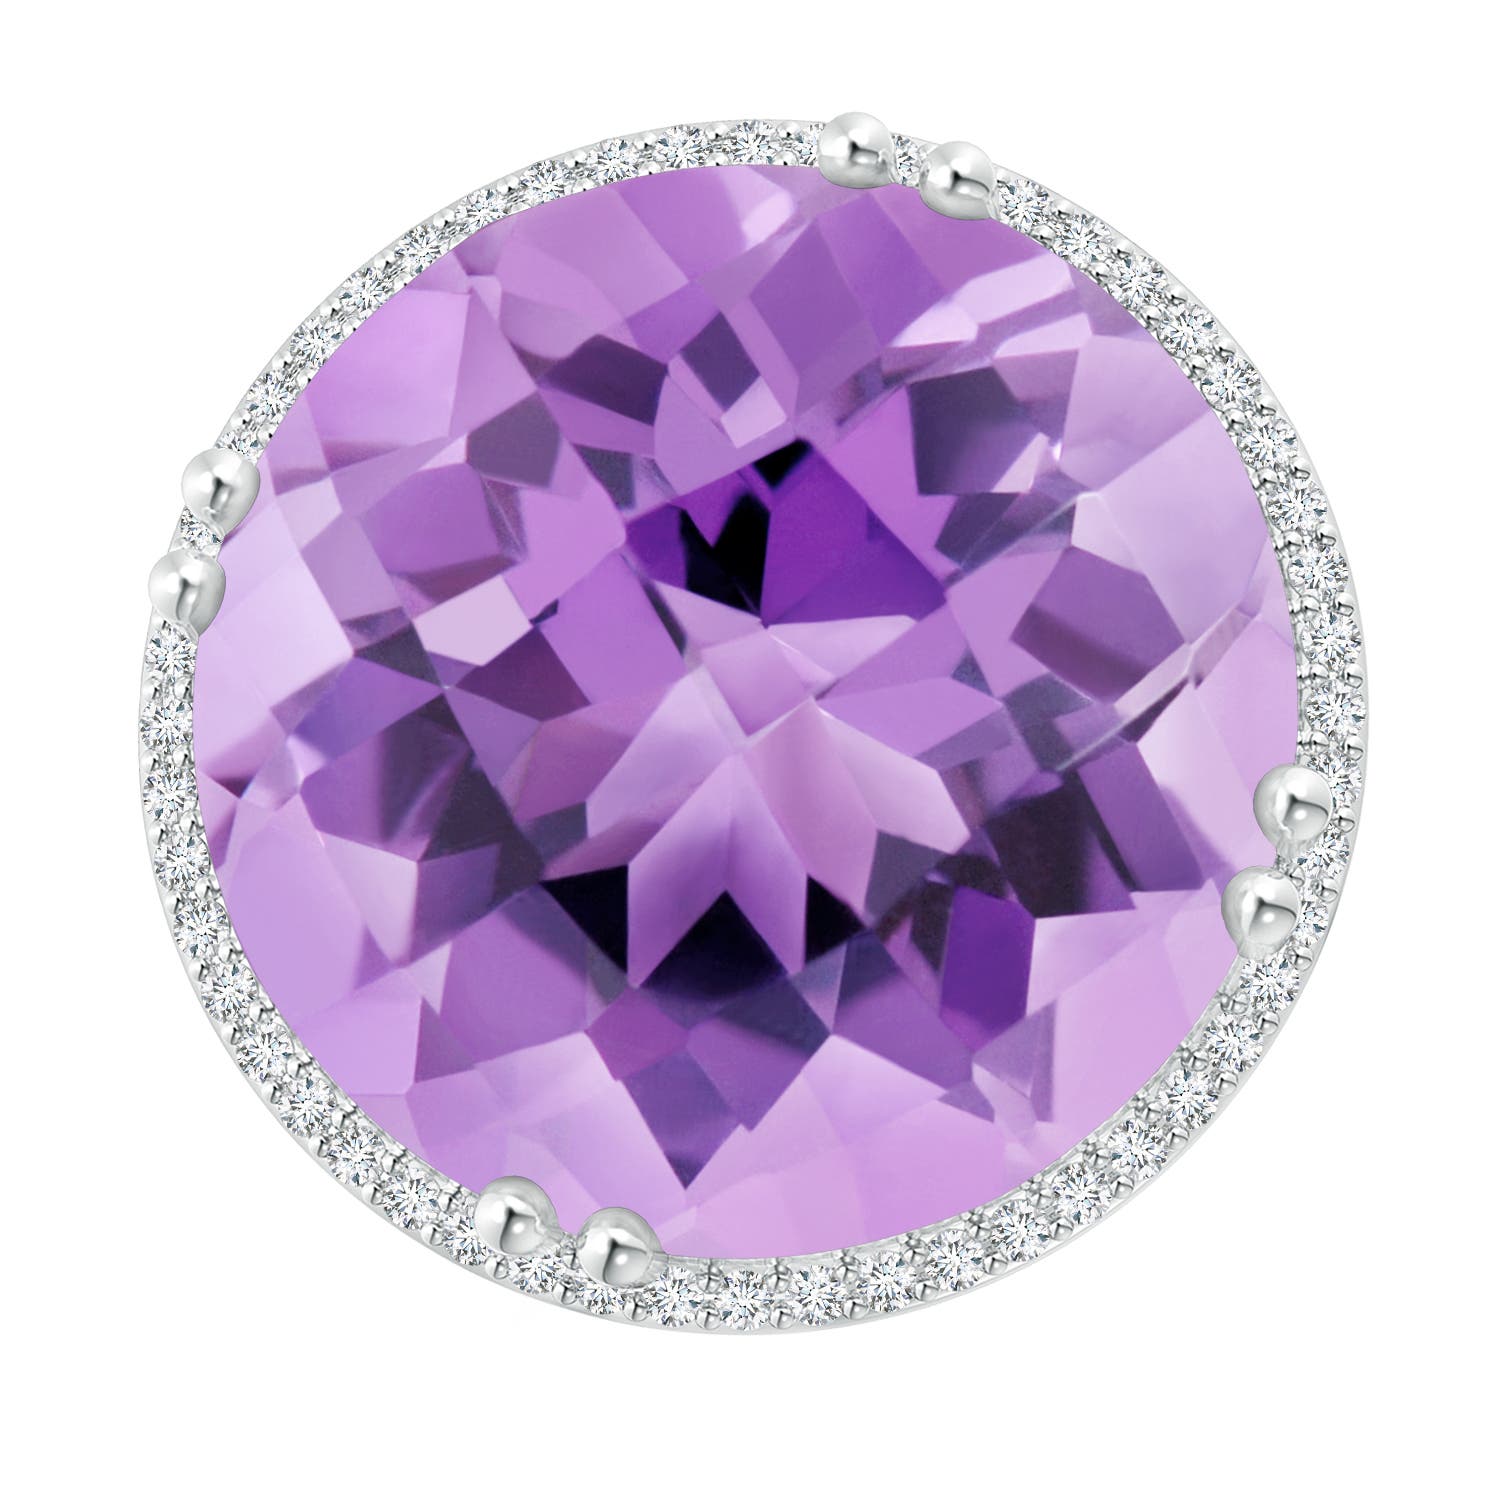 A - Amethyst / 21.26 CT / 14 KT White Gold